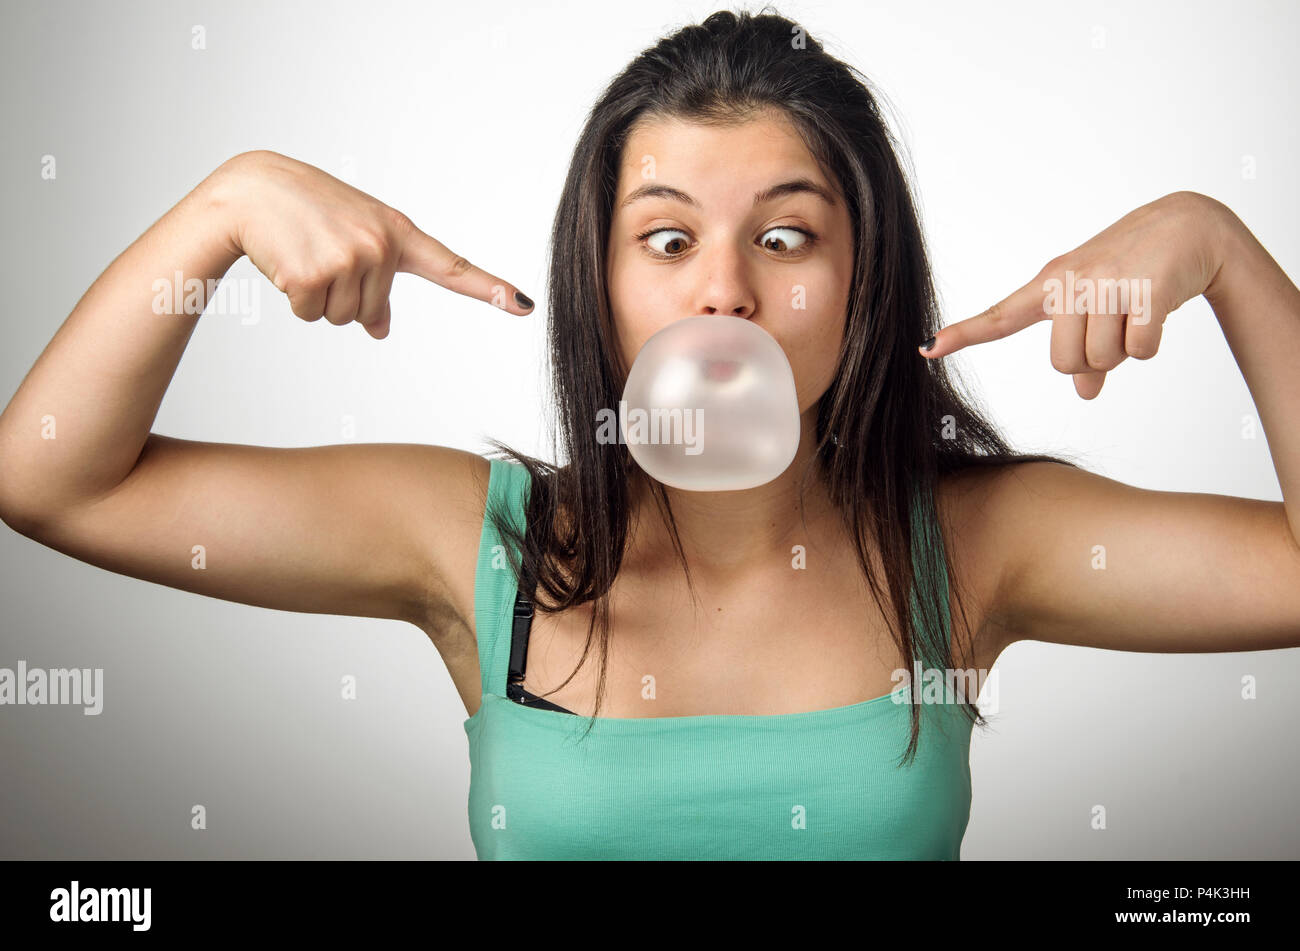 Pretty young girl with crossed eyes blowing a big chewing gum bubble Stock Photo